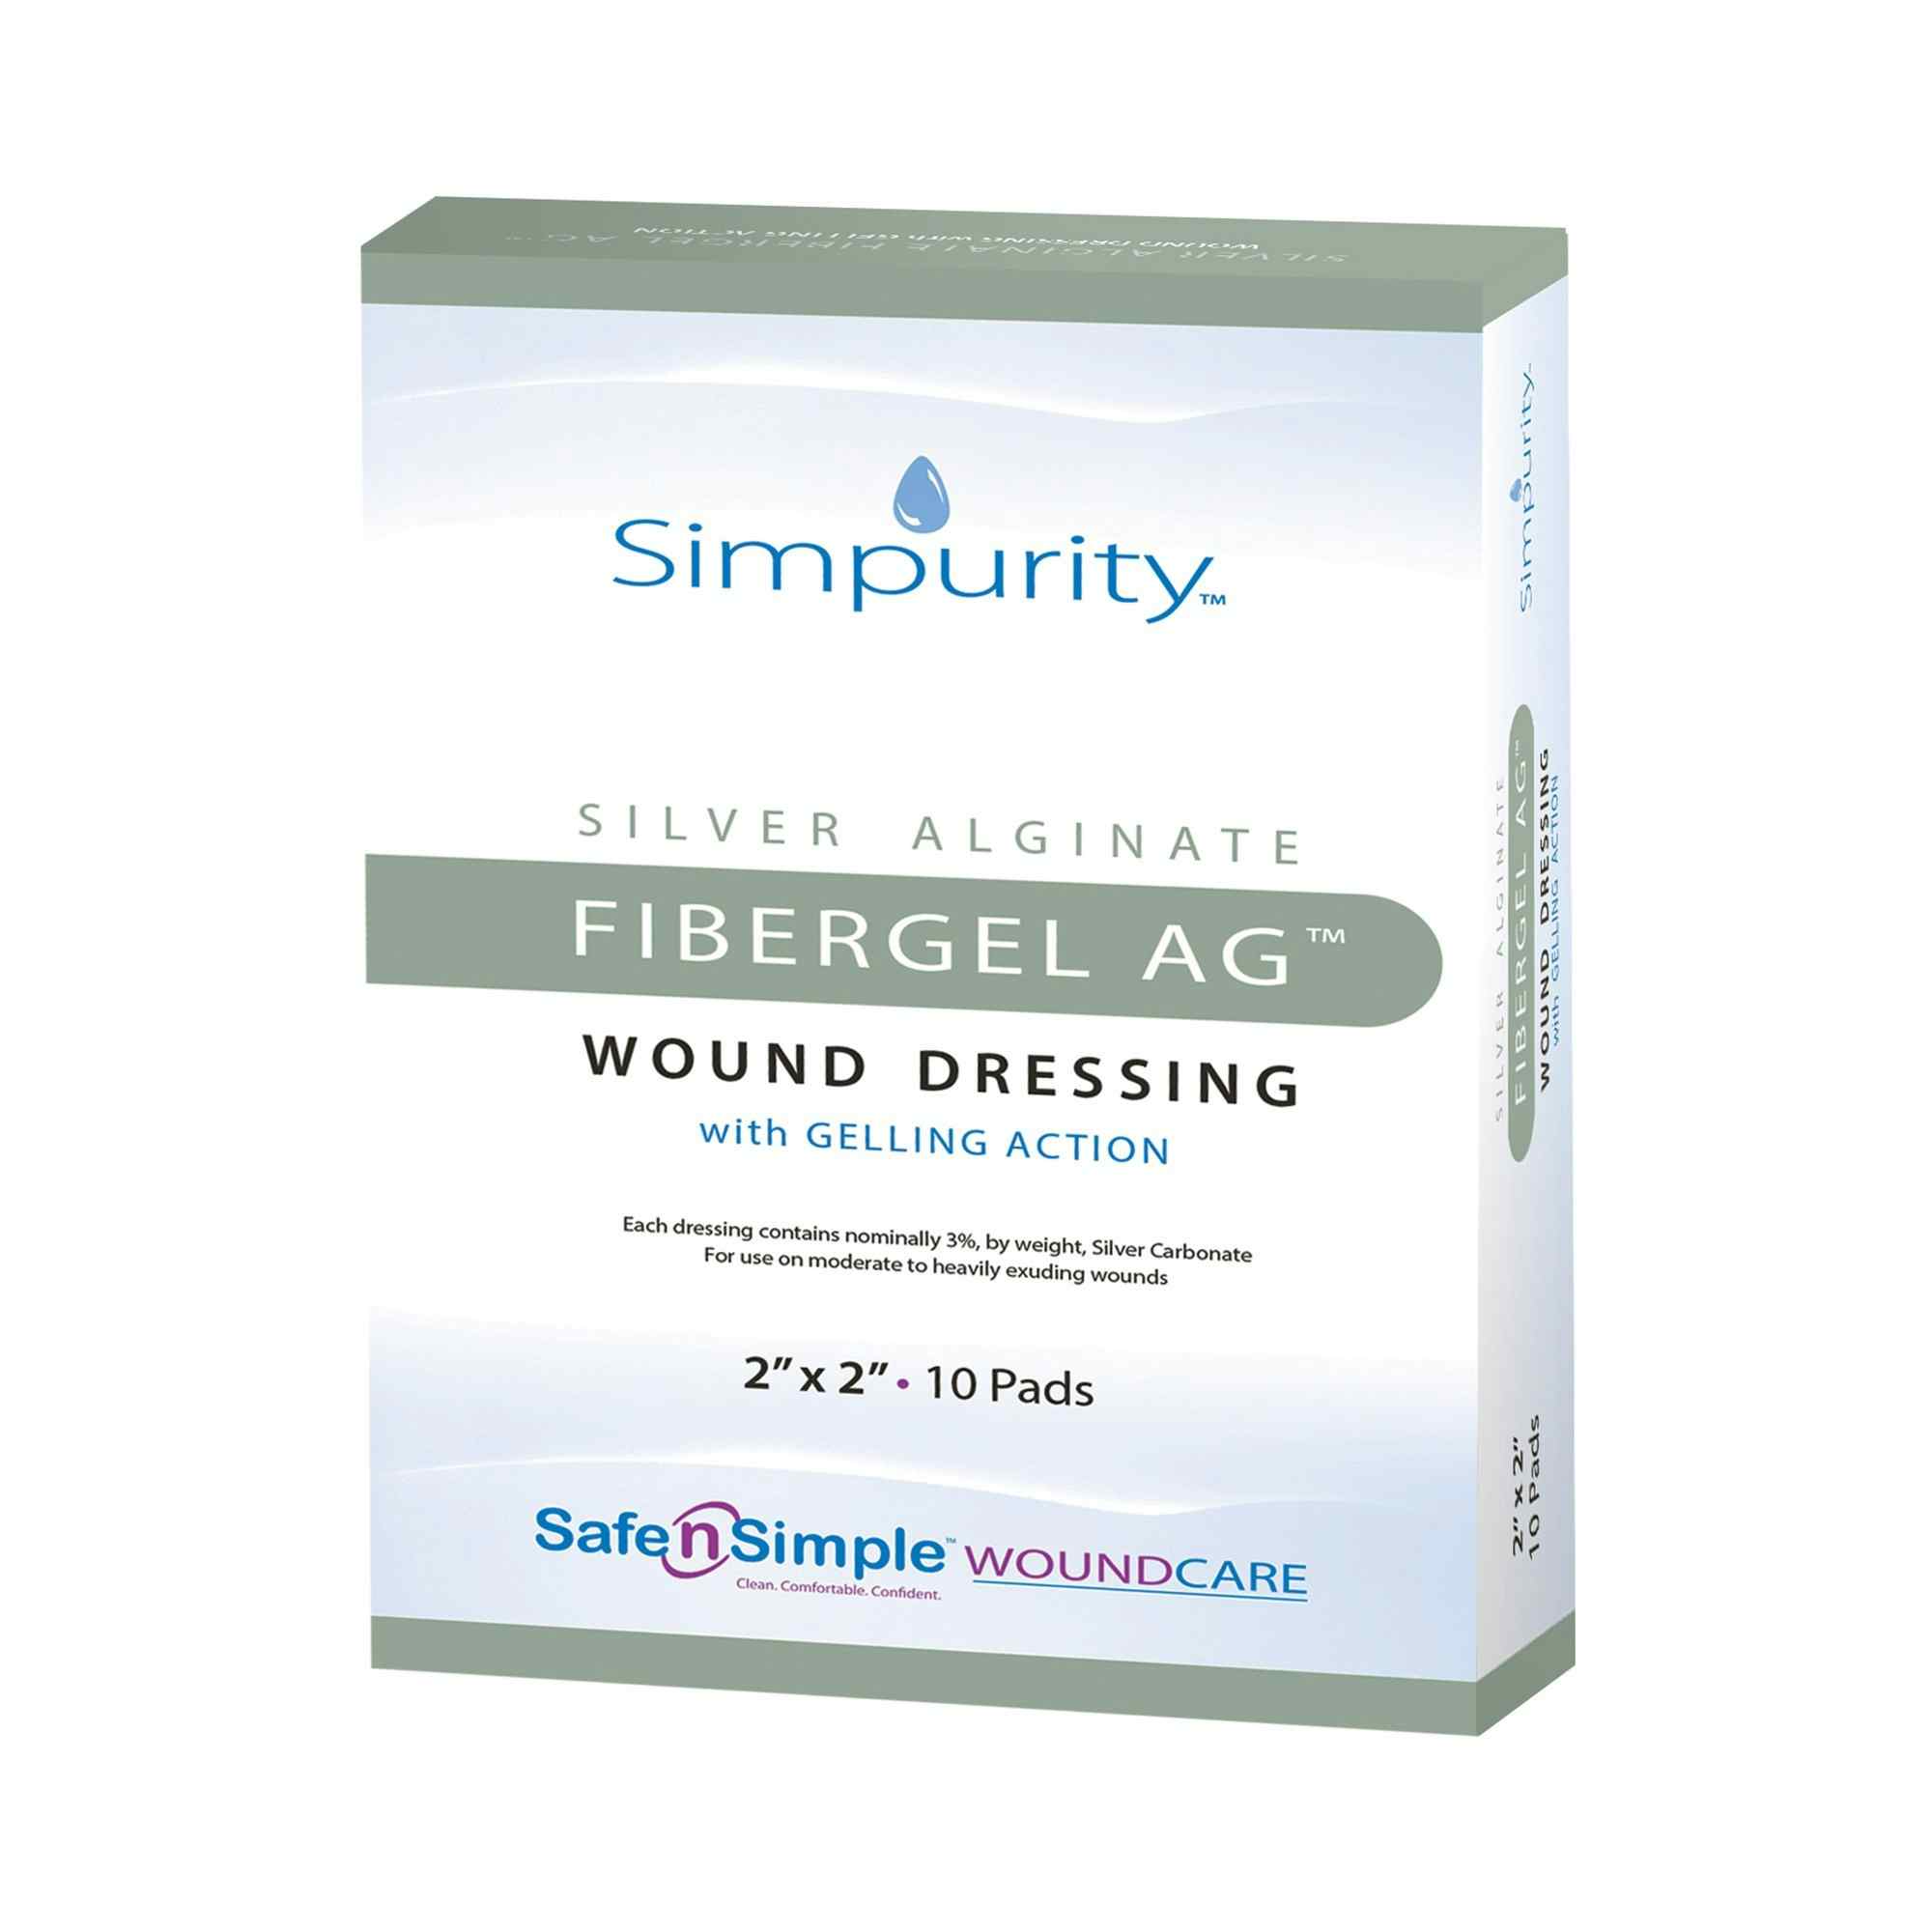 Safe N Simple Simpurity Fibergel AG Wound Dressing with Gelling Action, 2 X 2"